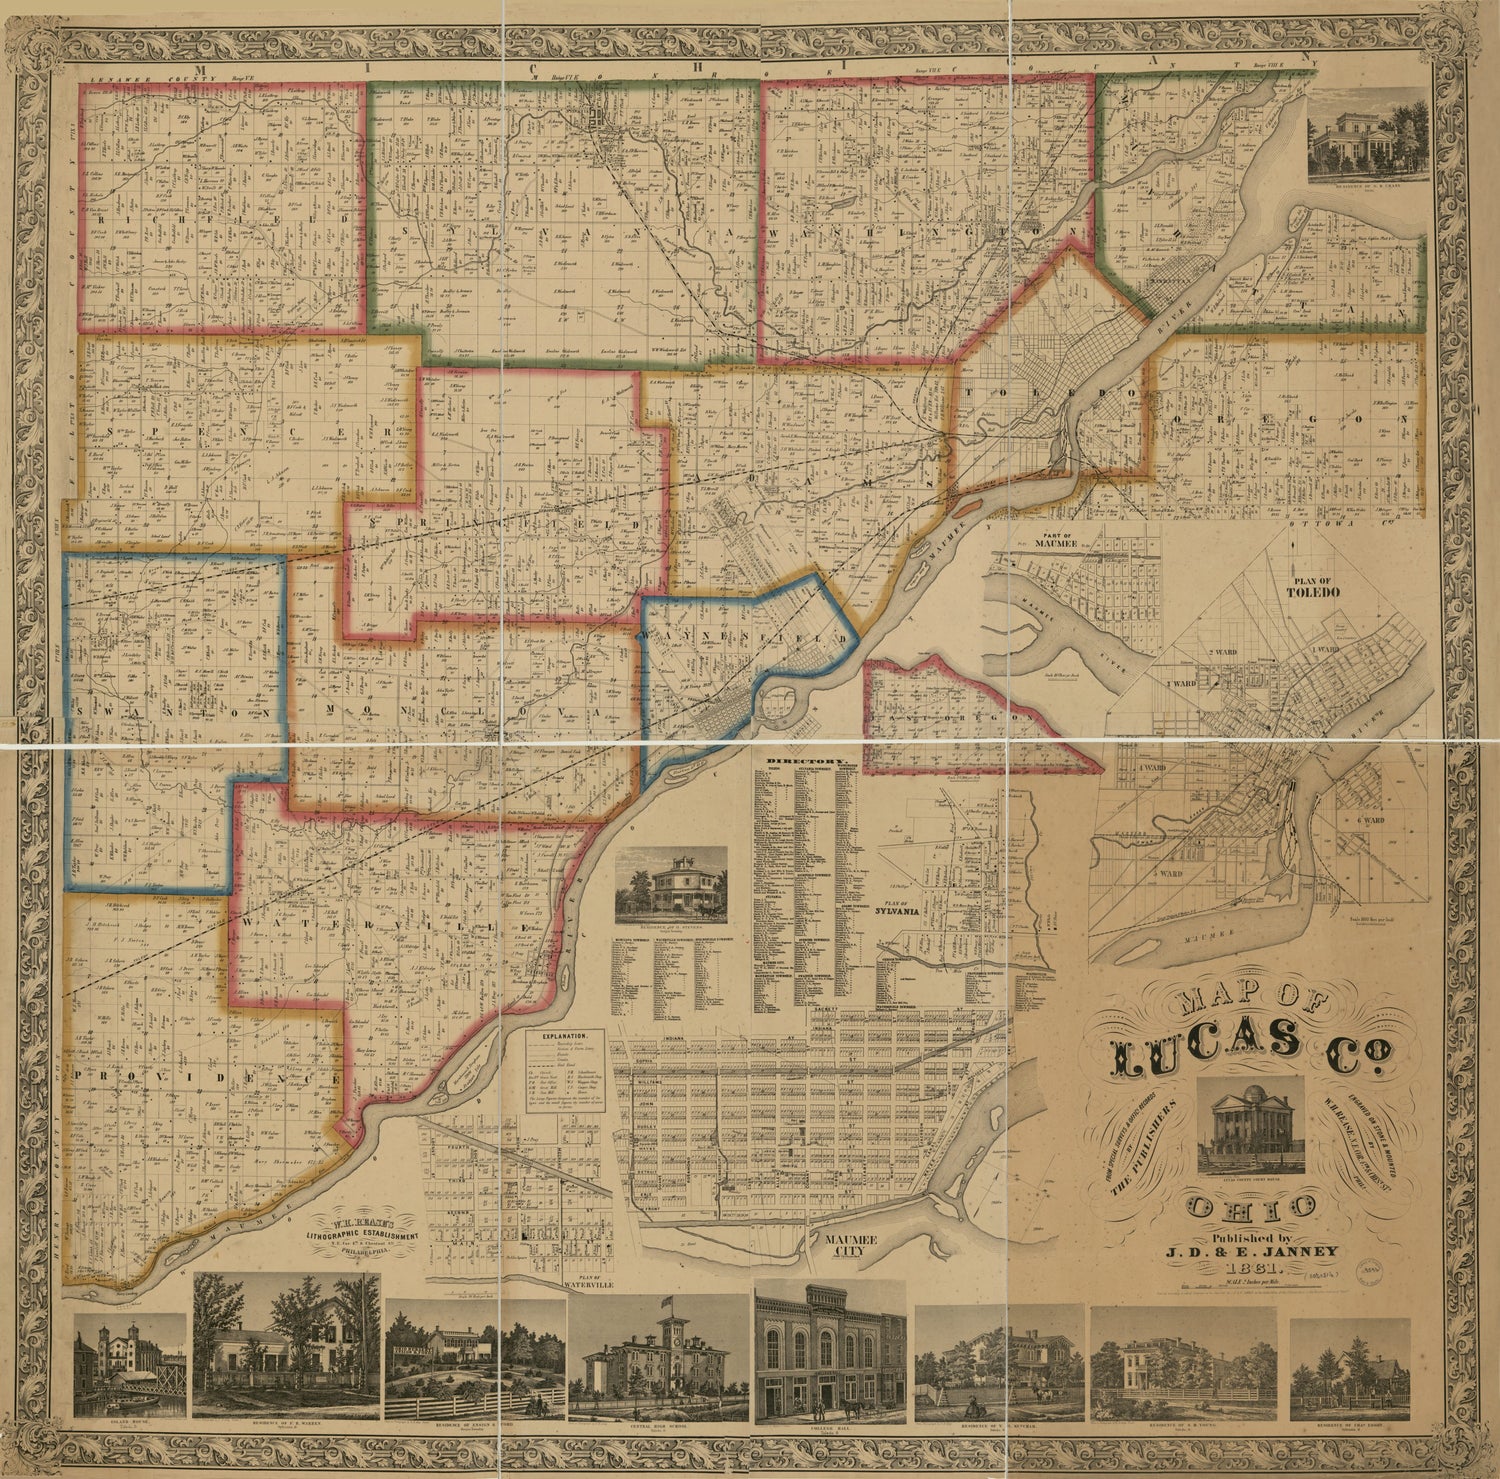 This old map of Map of Lucas Co., Ohio from 1861 was created by W. H. Rease in 1861